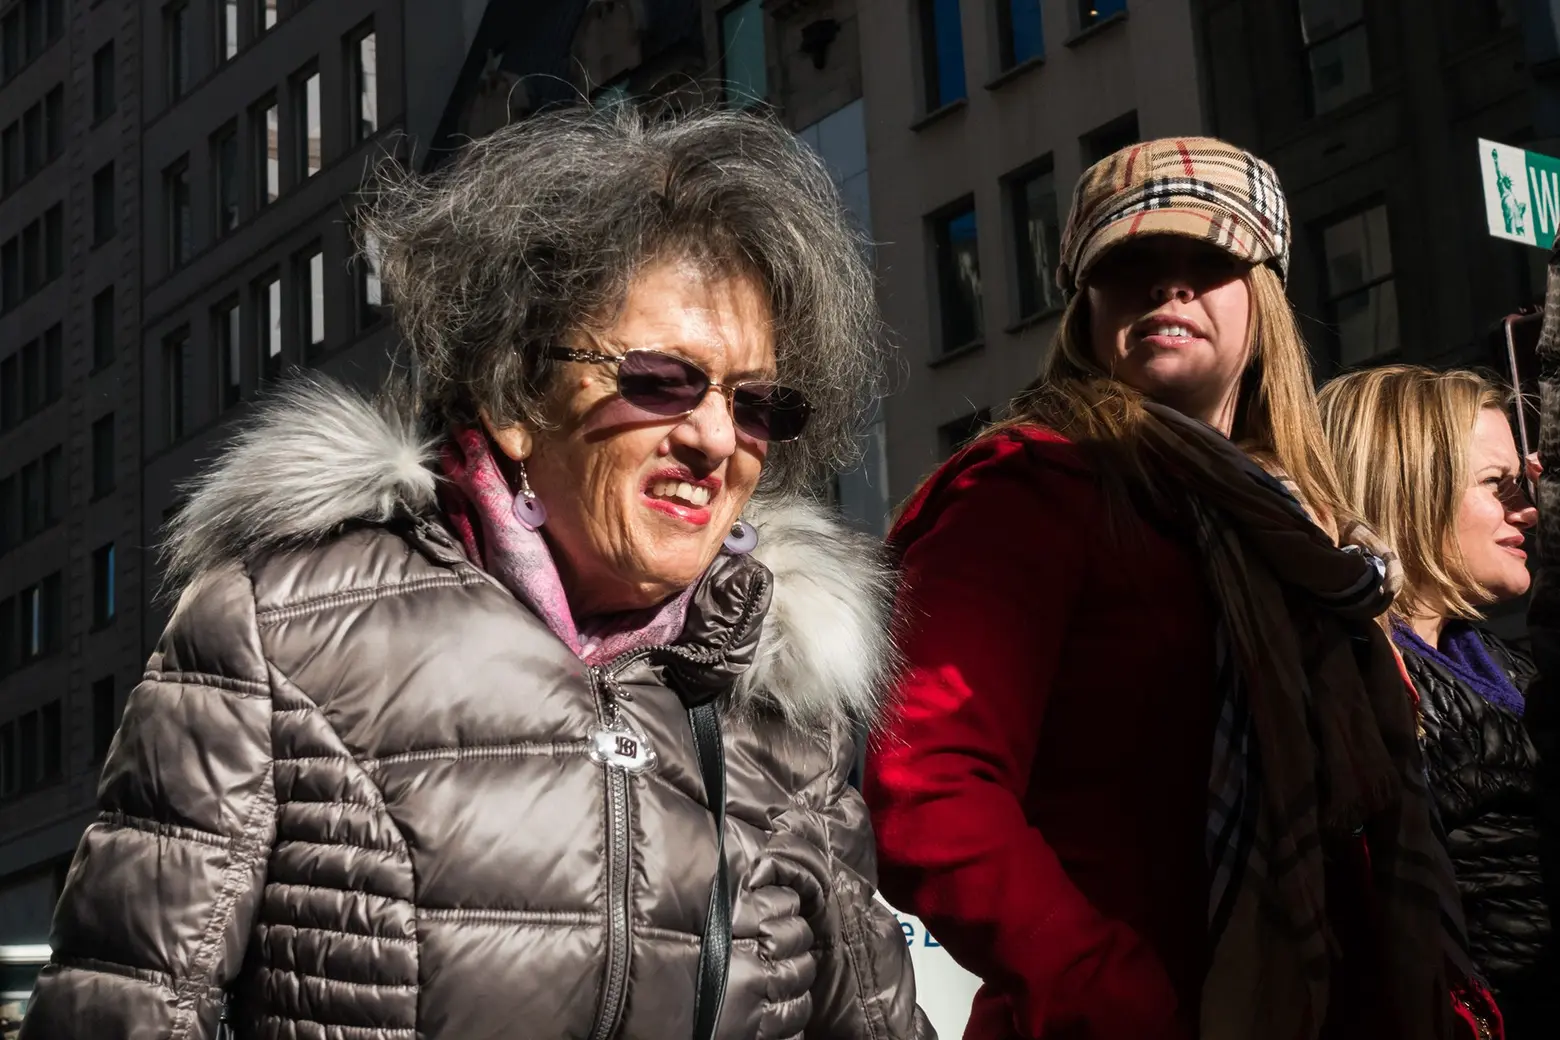 Fifth Avenuers, NYC street photography, Nei Valente, Fifth Avenue NYC